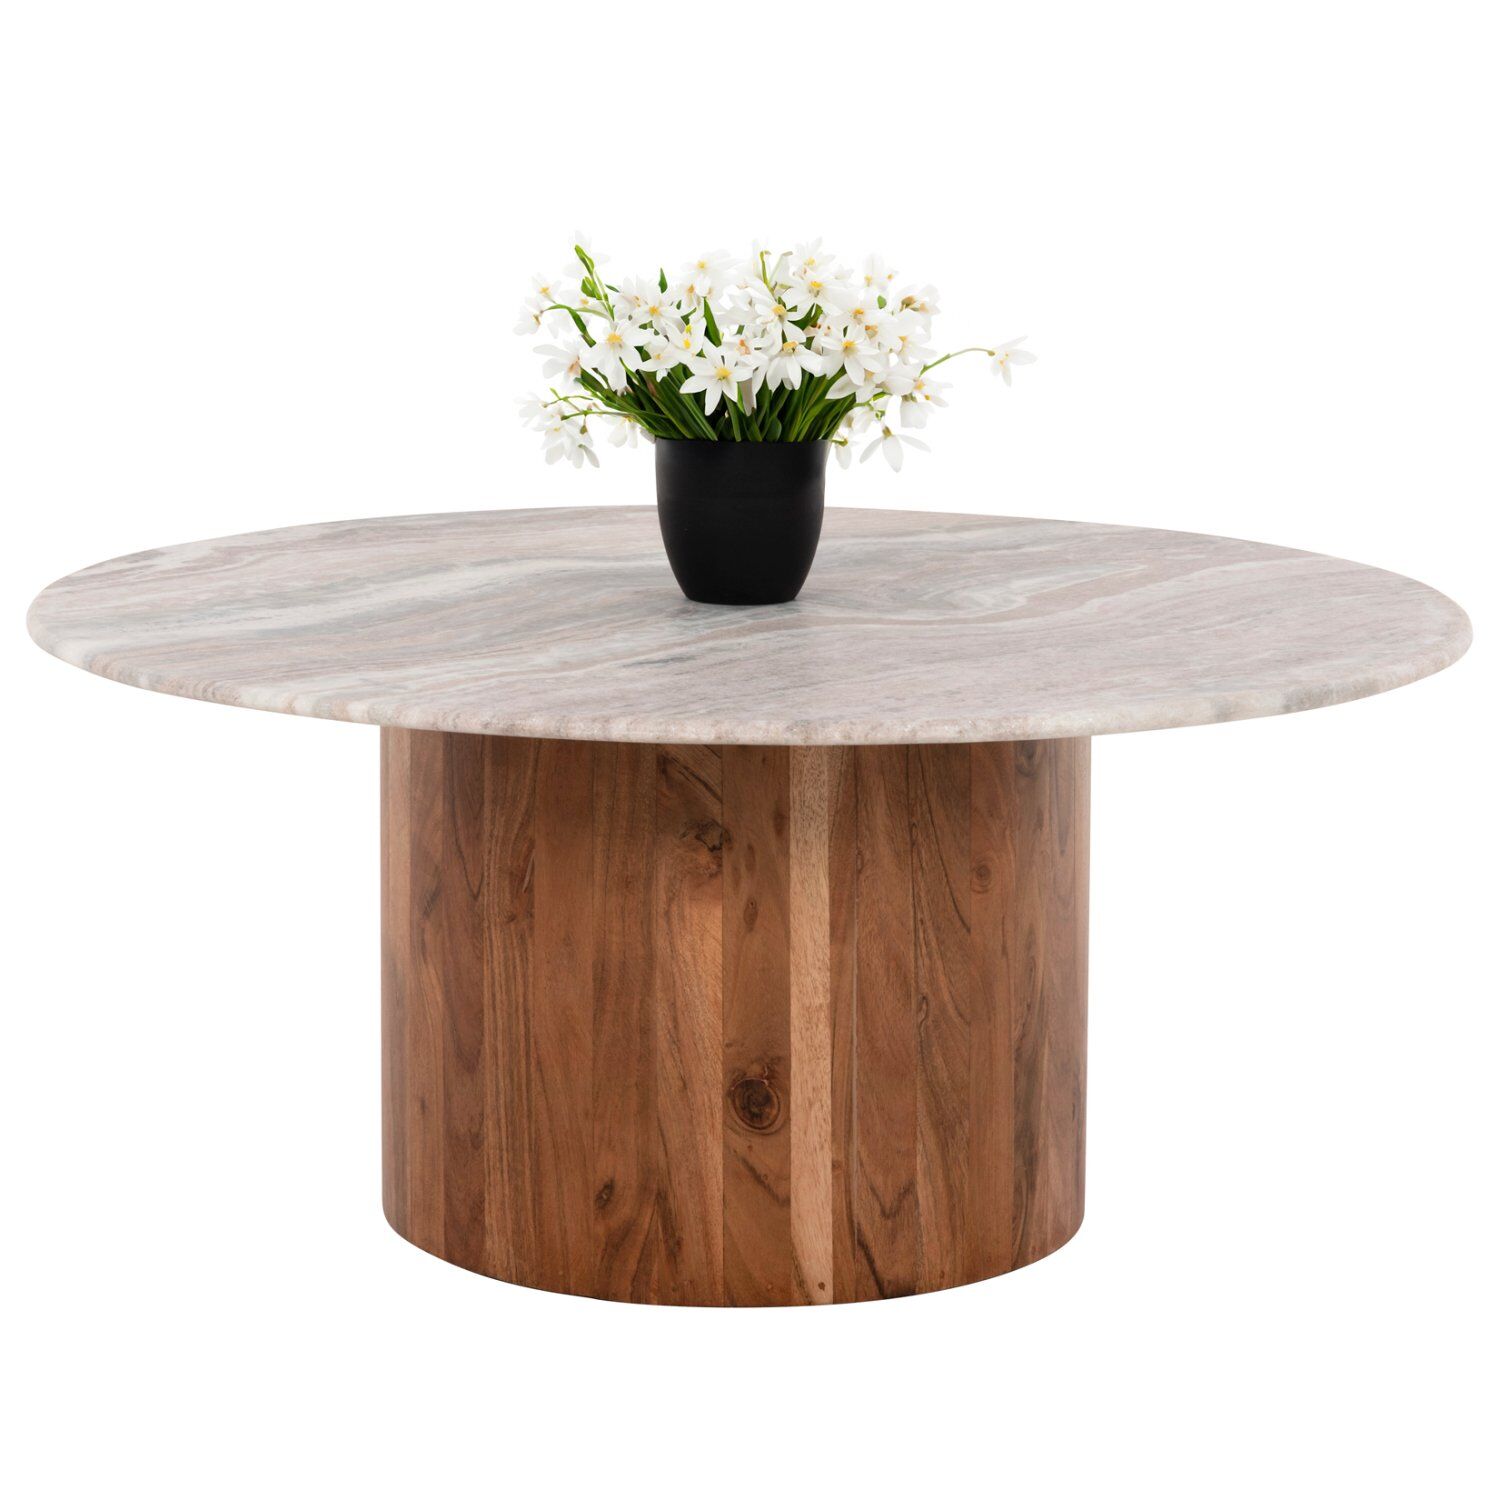 COFFEE TABLE FORMEL HM9672 ACACIA WOOD IN NATURAL-WHITE MARBLE TOP Φ80x36Hcm.